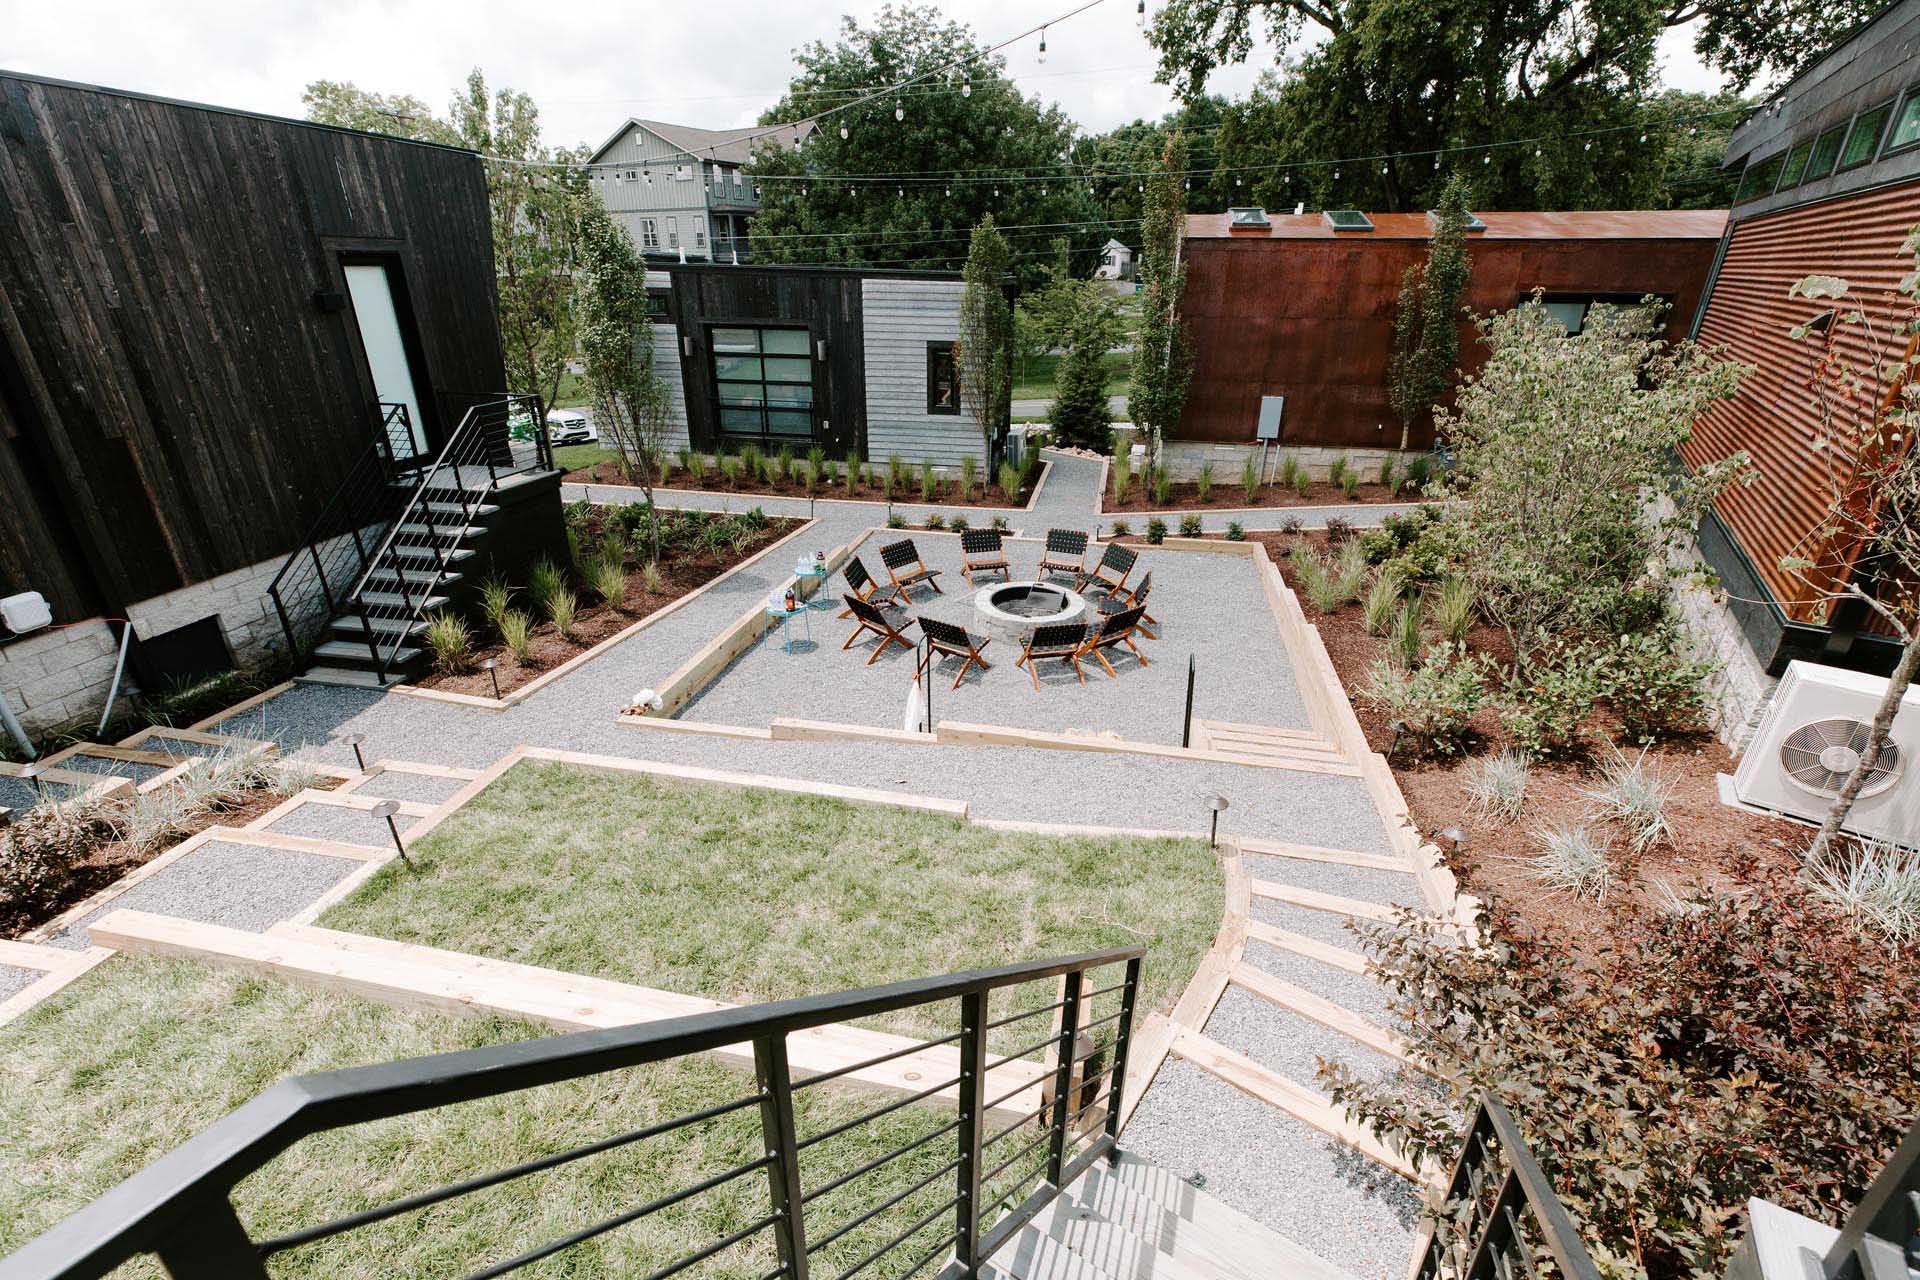 Located in Nashville, Tennessee, Ironwood Grove is a community of 6 tiny homes that have been turned into a small hotel, that also includes a courtyard with a fire pit.